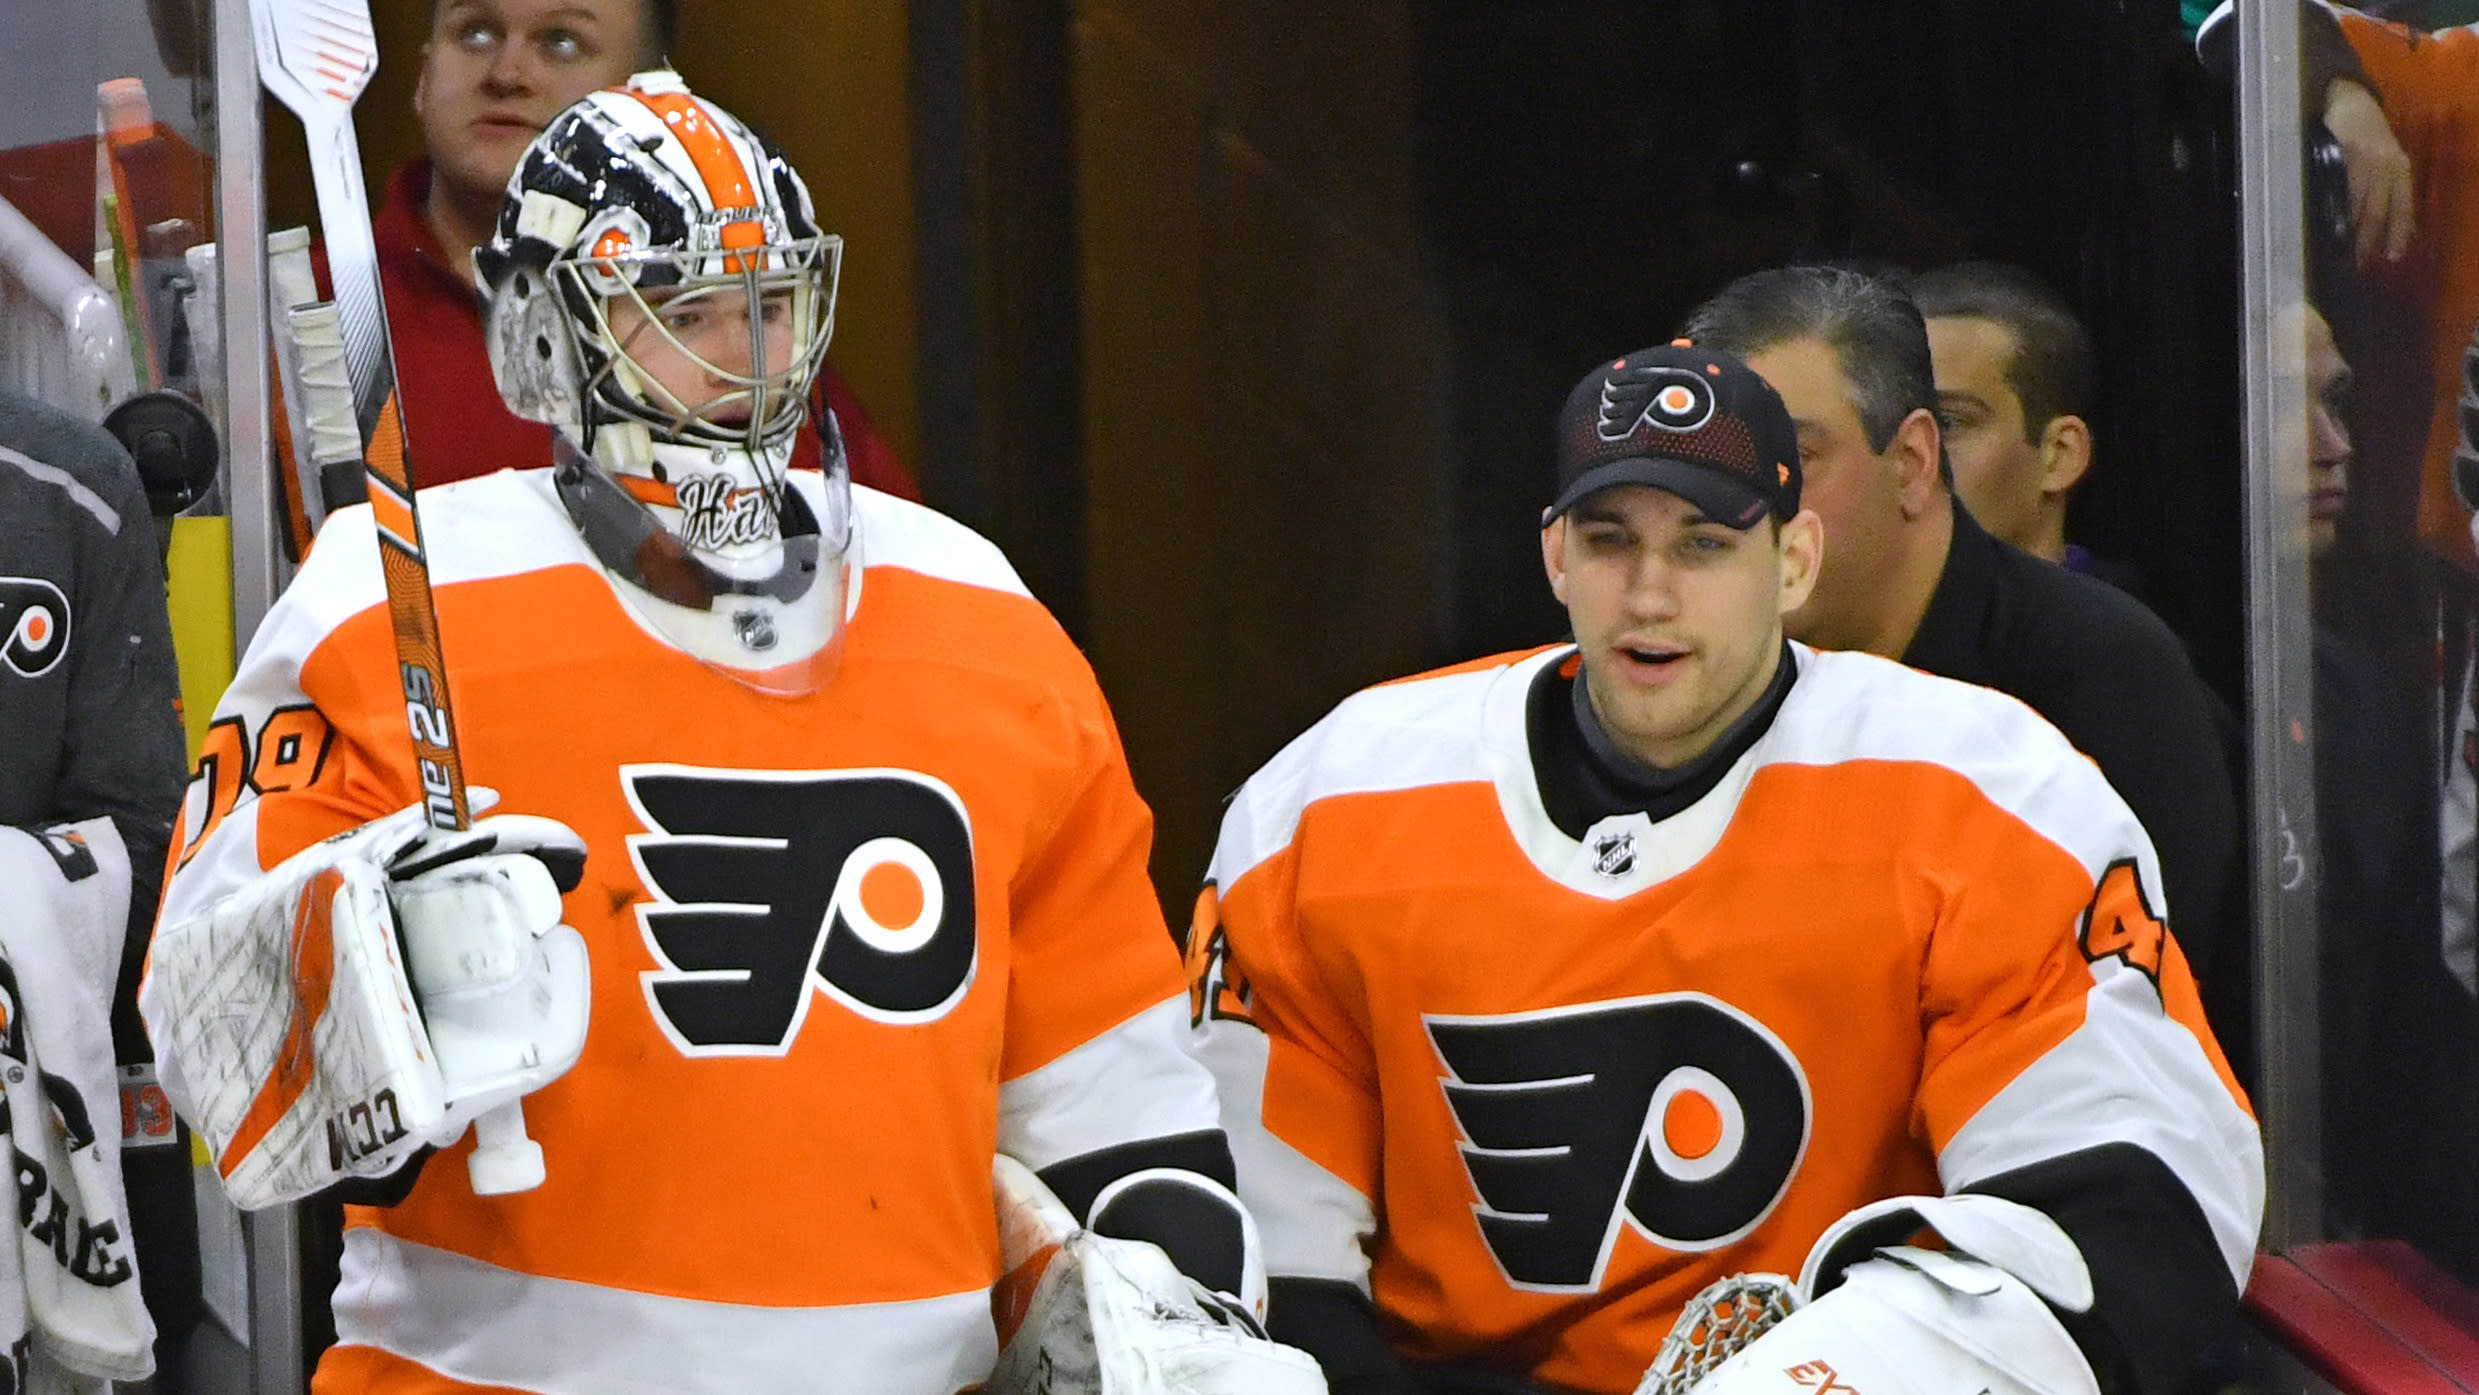 Flyers vs. Kings: Live stream, storylines, game time and more